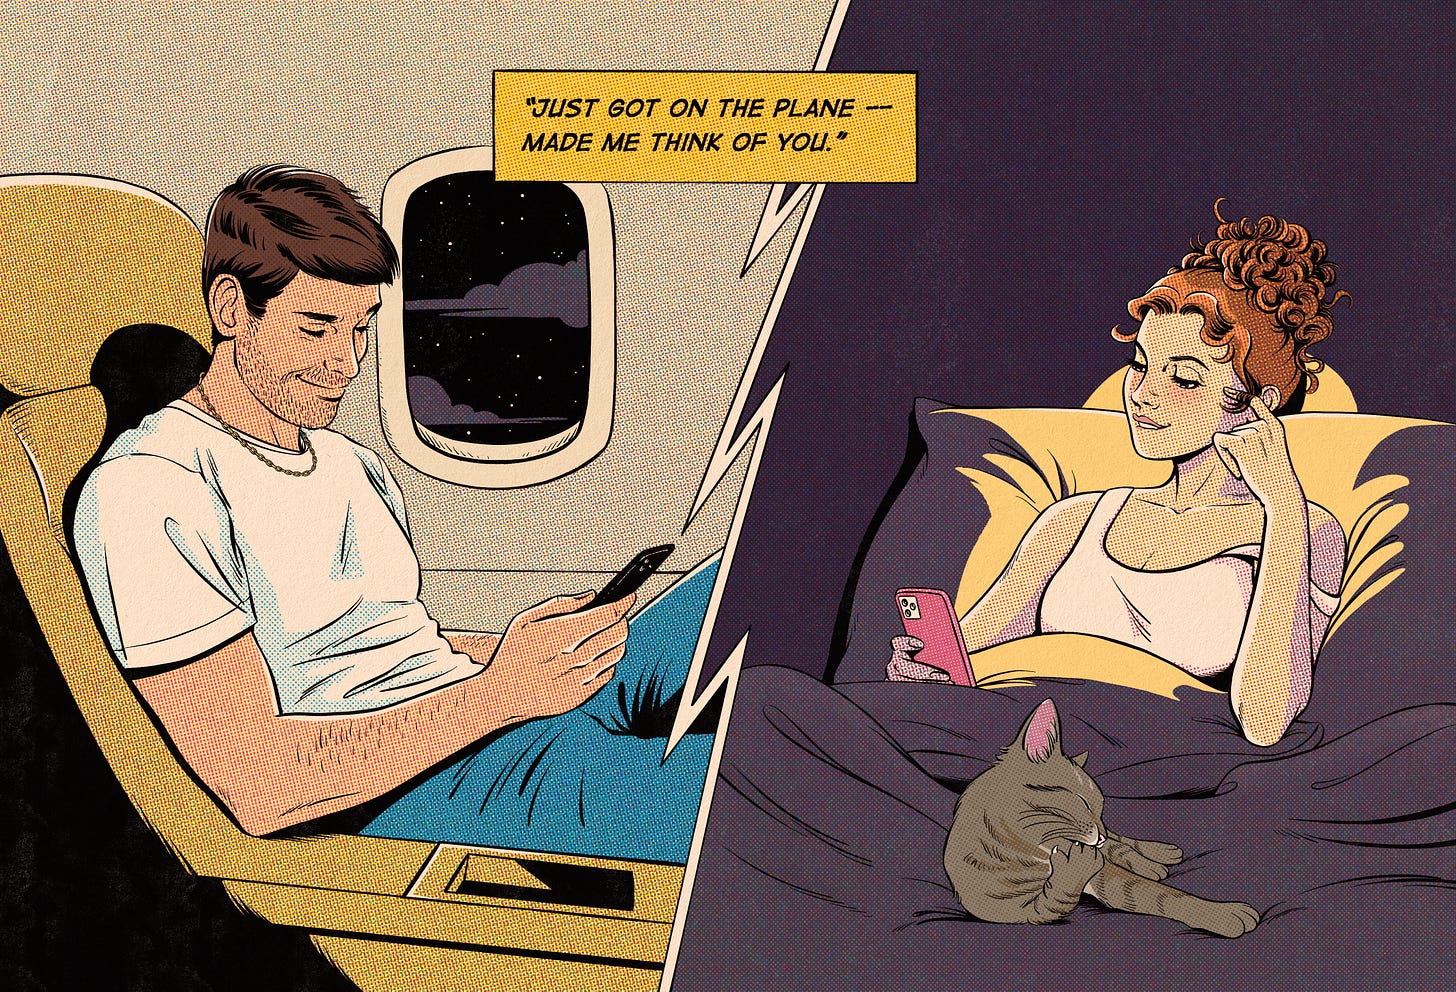 Split screen, where the left side is Chris, a white man with brown hair, wearing a white t-shirt and jeans and a gold chain, leaning back in an airplane seat and smiling down at his phone; and the right side shows Daphne, a white woman with her curly red-brown hair up in a messy bun, twirling part of her hair,  biting her lip as she looks down at her phone. Her cat Milo is chewing on his paw down by her feet while she lies in bed under the covers.